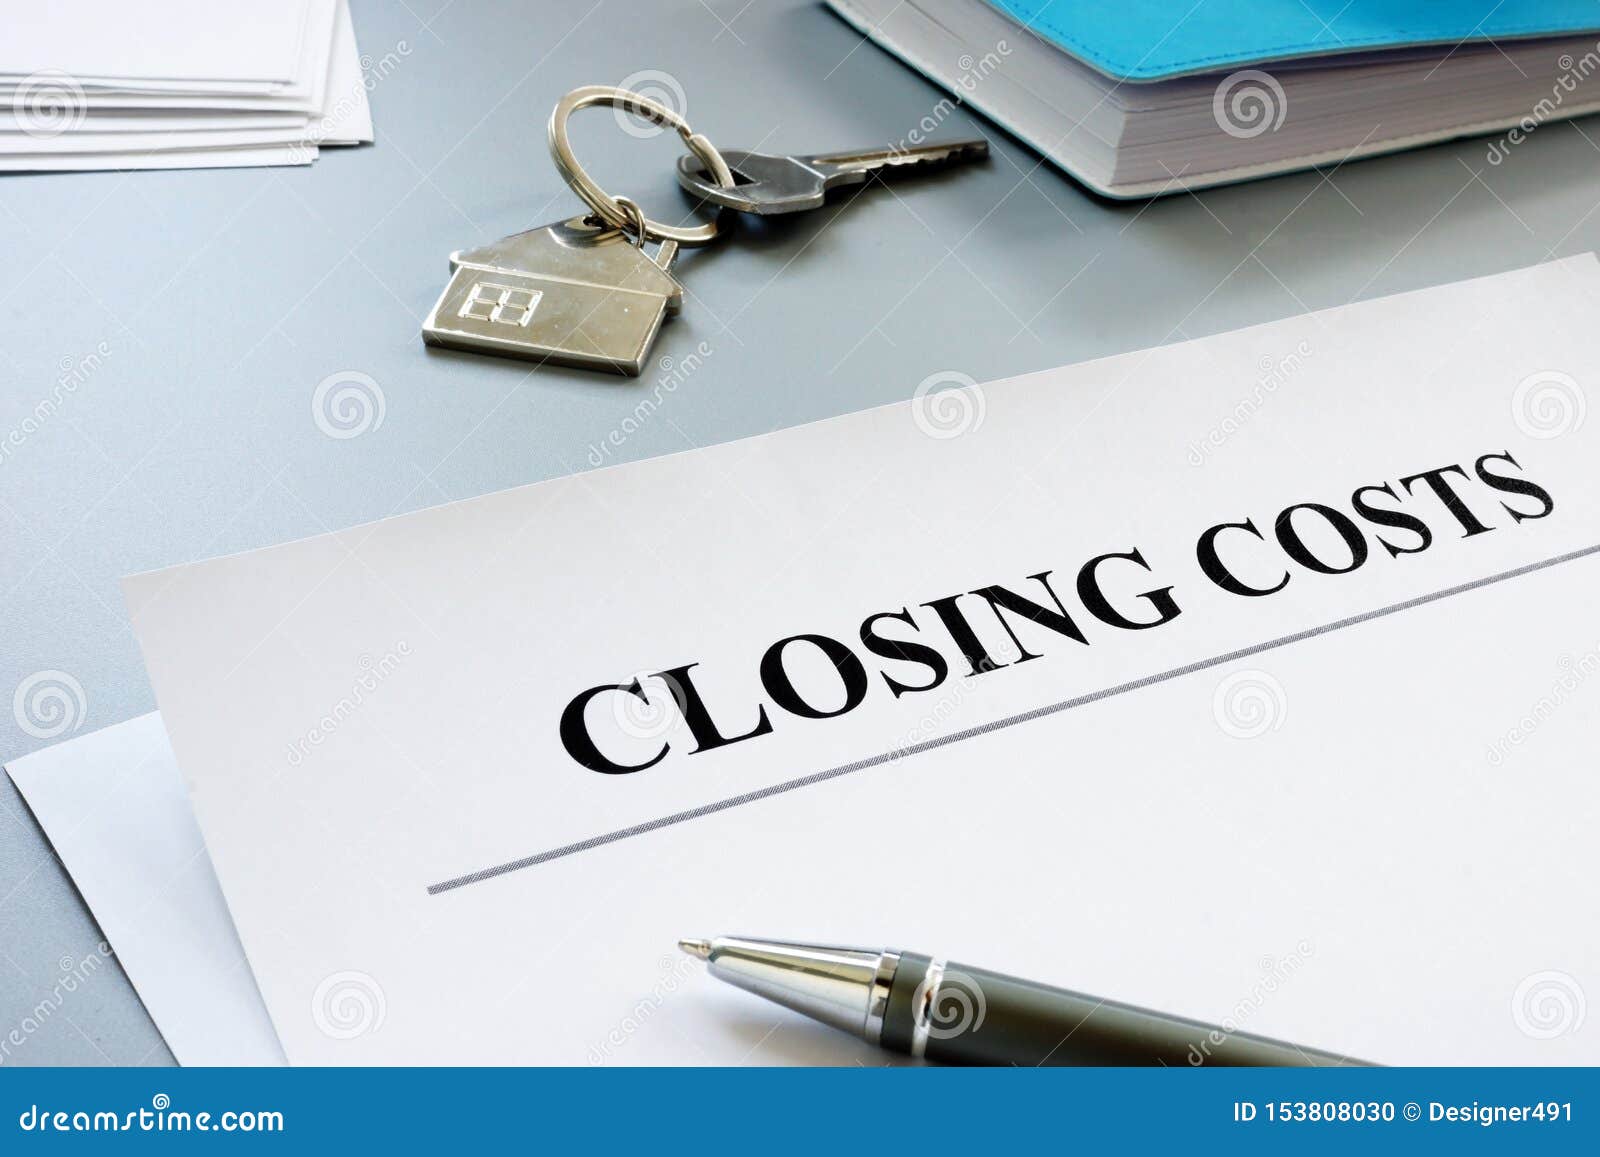 documents for closing costs and key